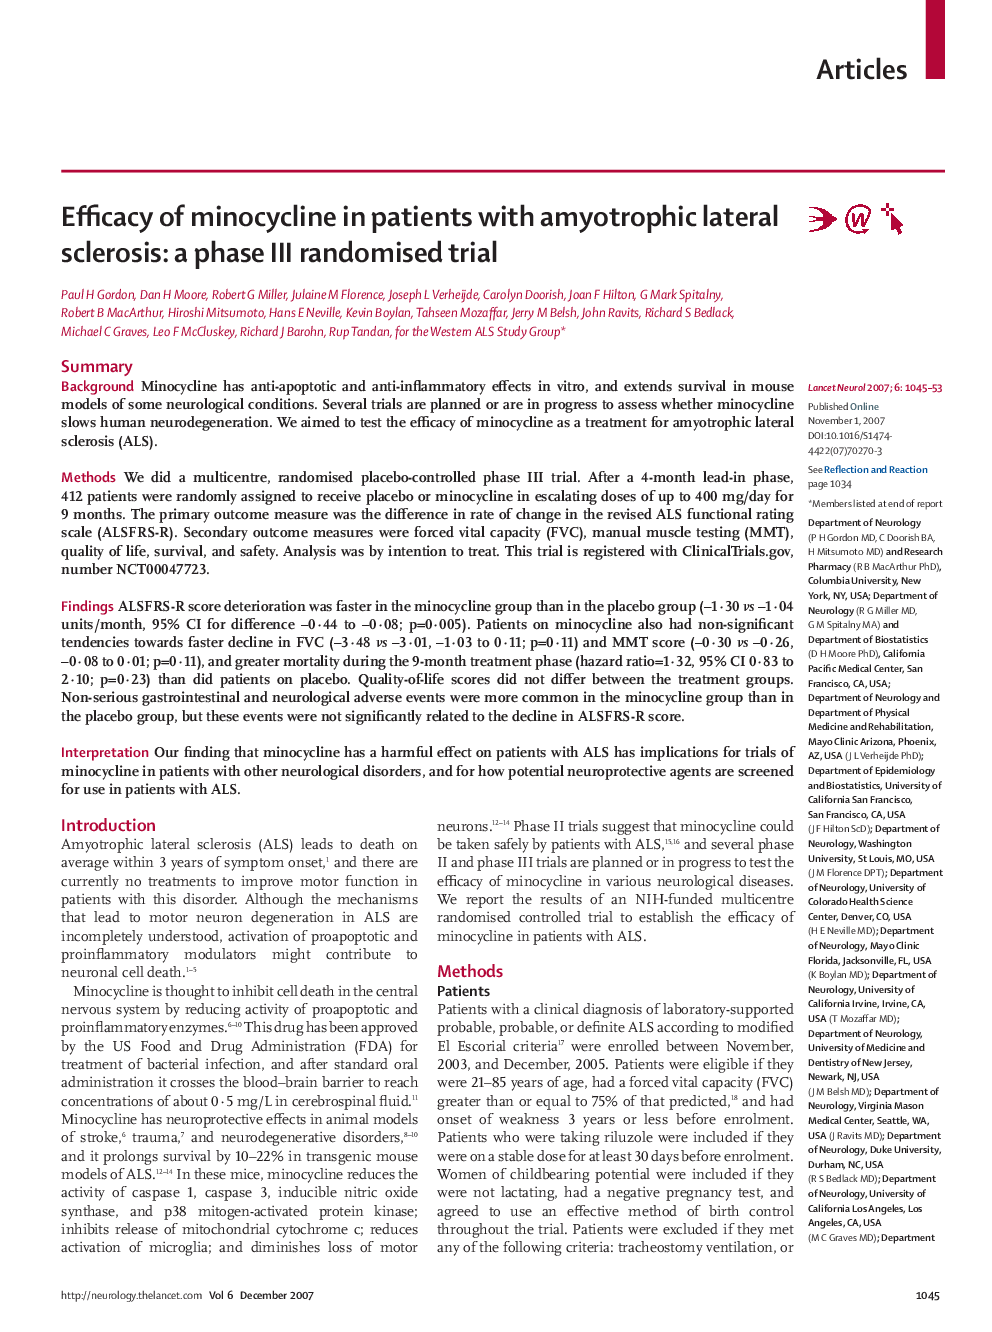 Efficacy of minocycline in patients with amyotrophic lateral sclerosis: a phase III randomised trial